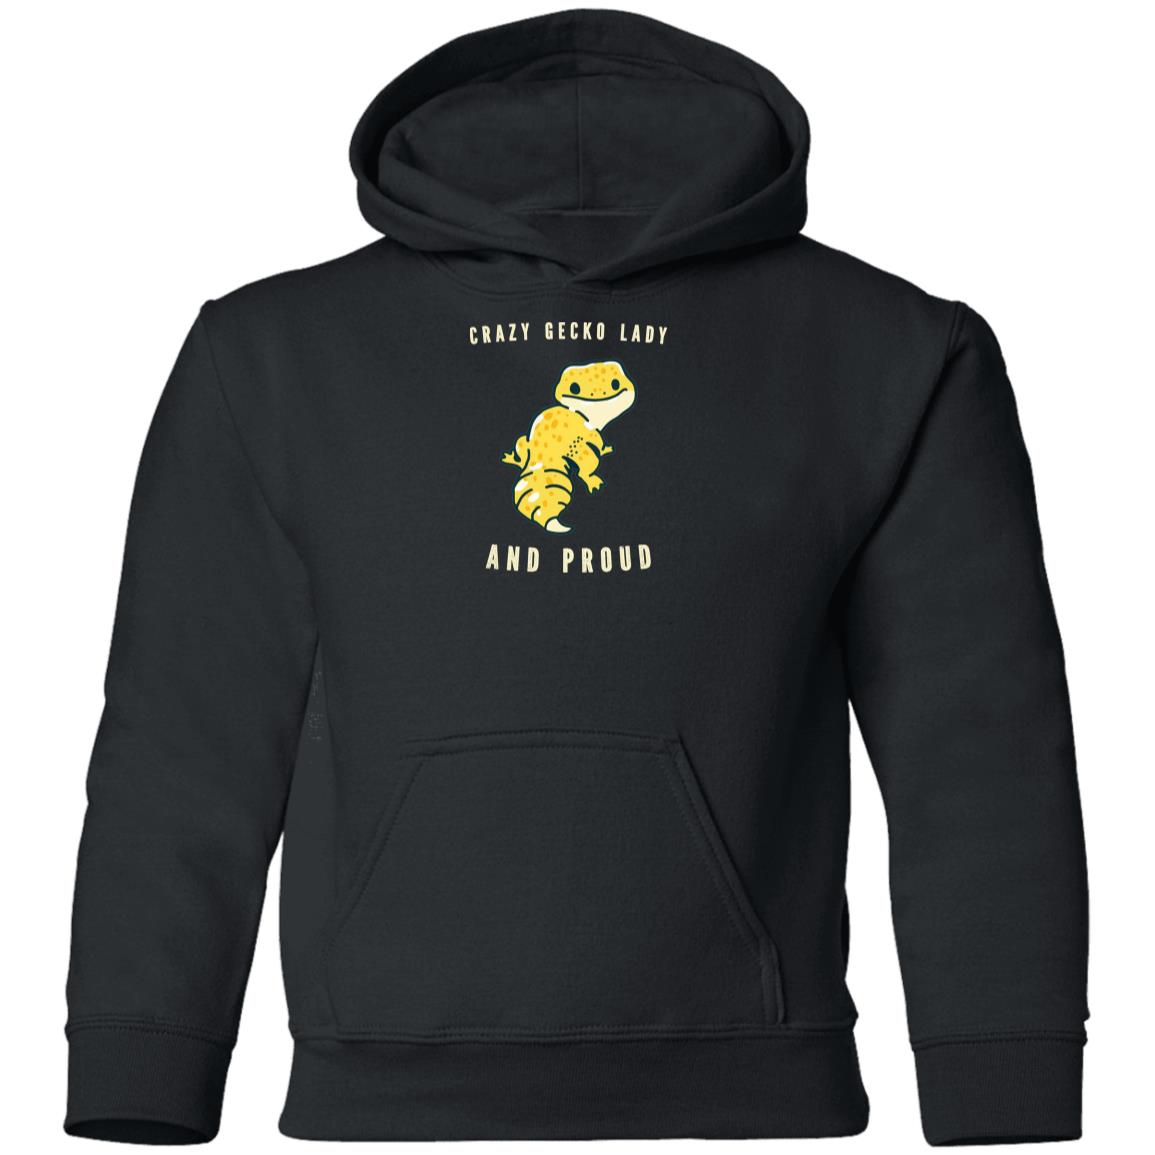 Crazy Gecko Lady And Proud - Youth Pullover Hoodie